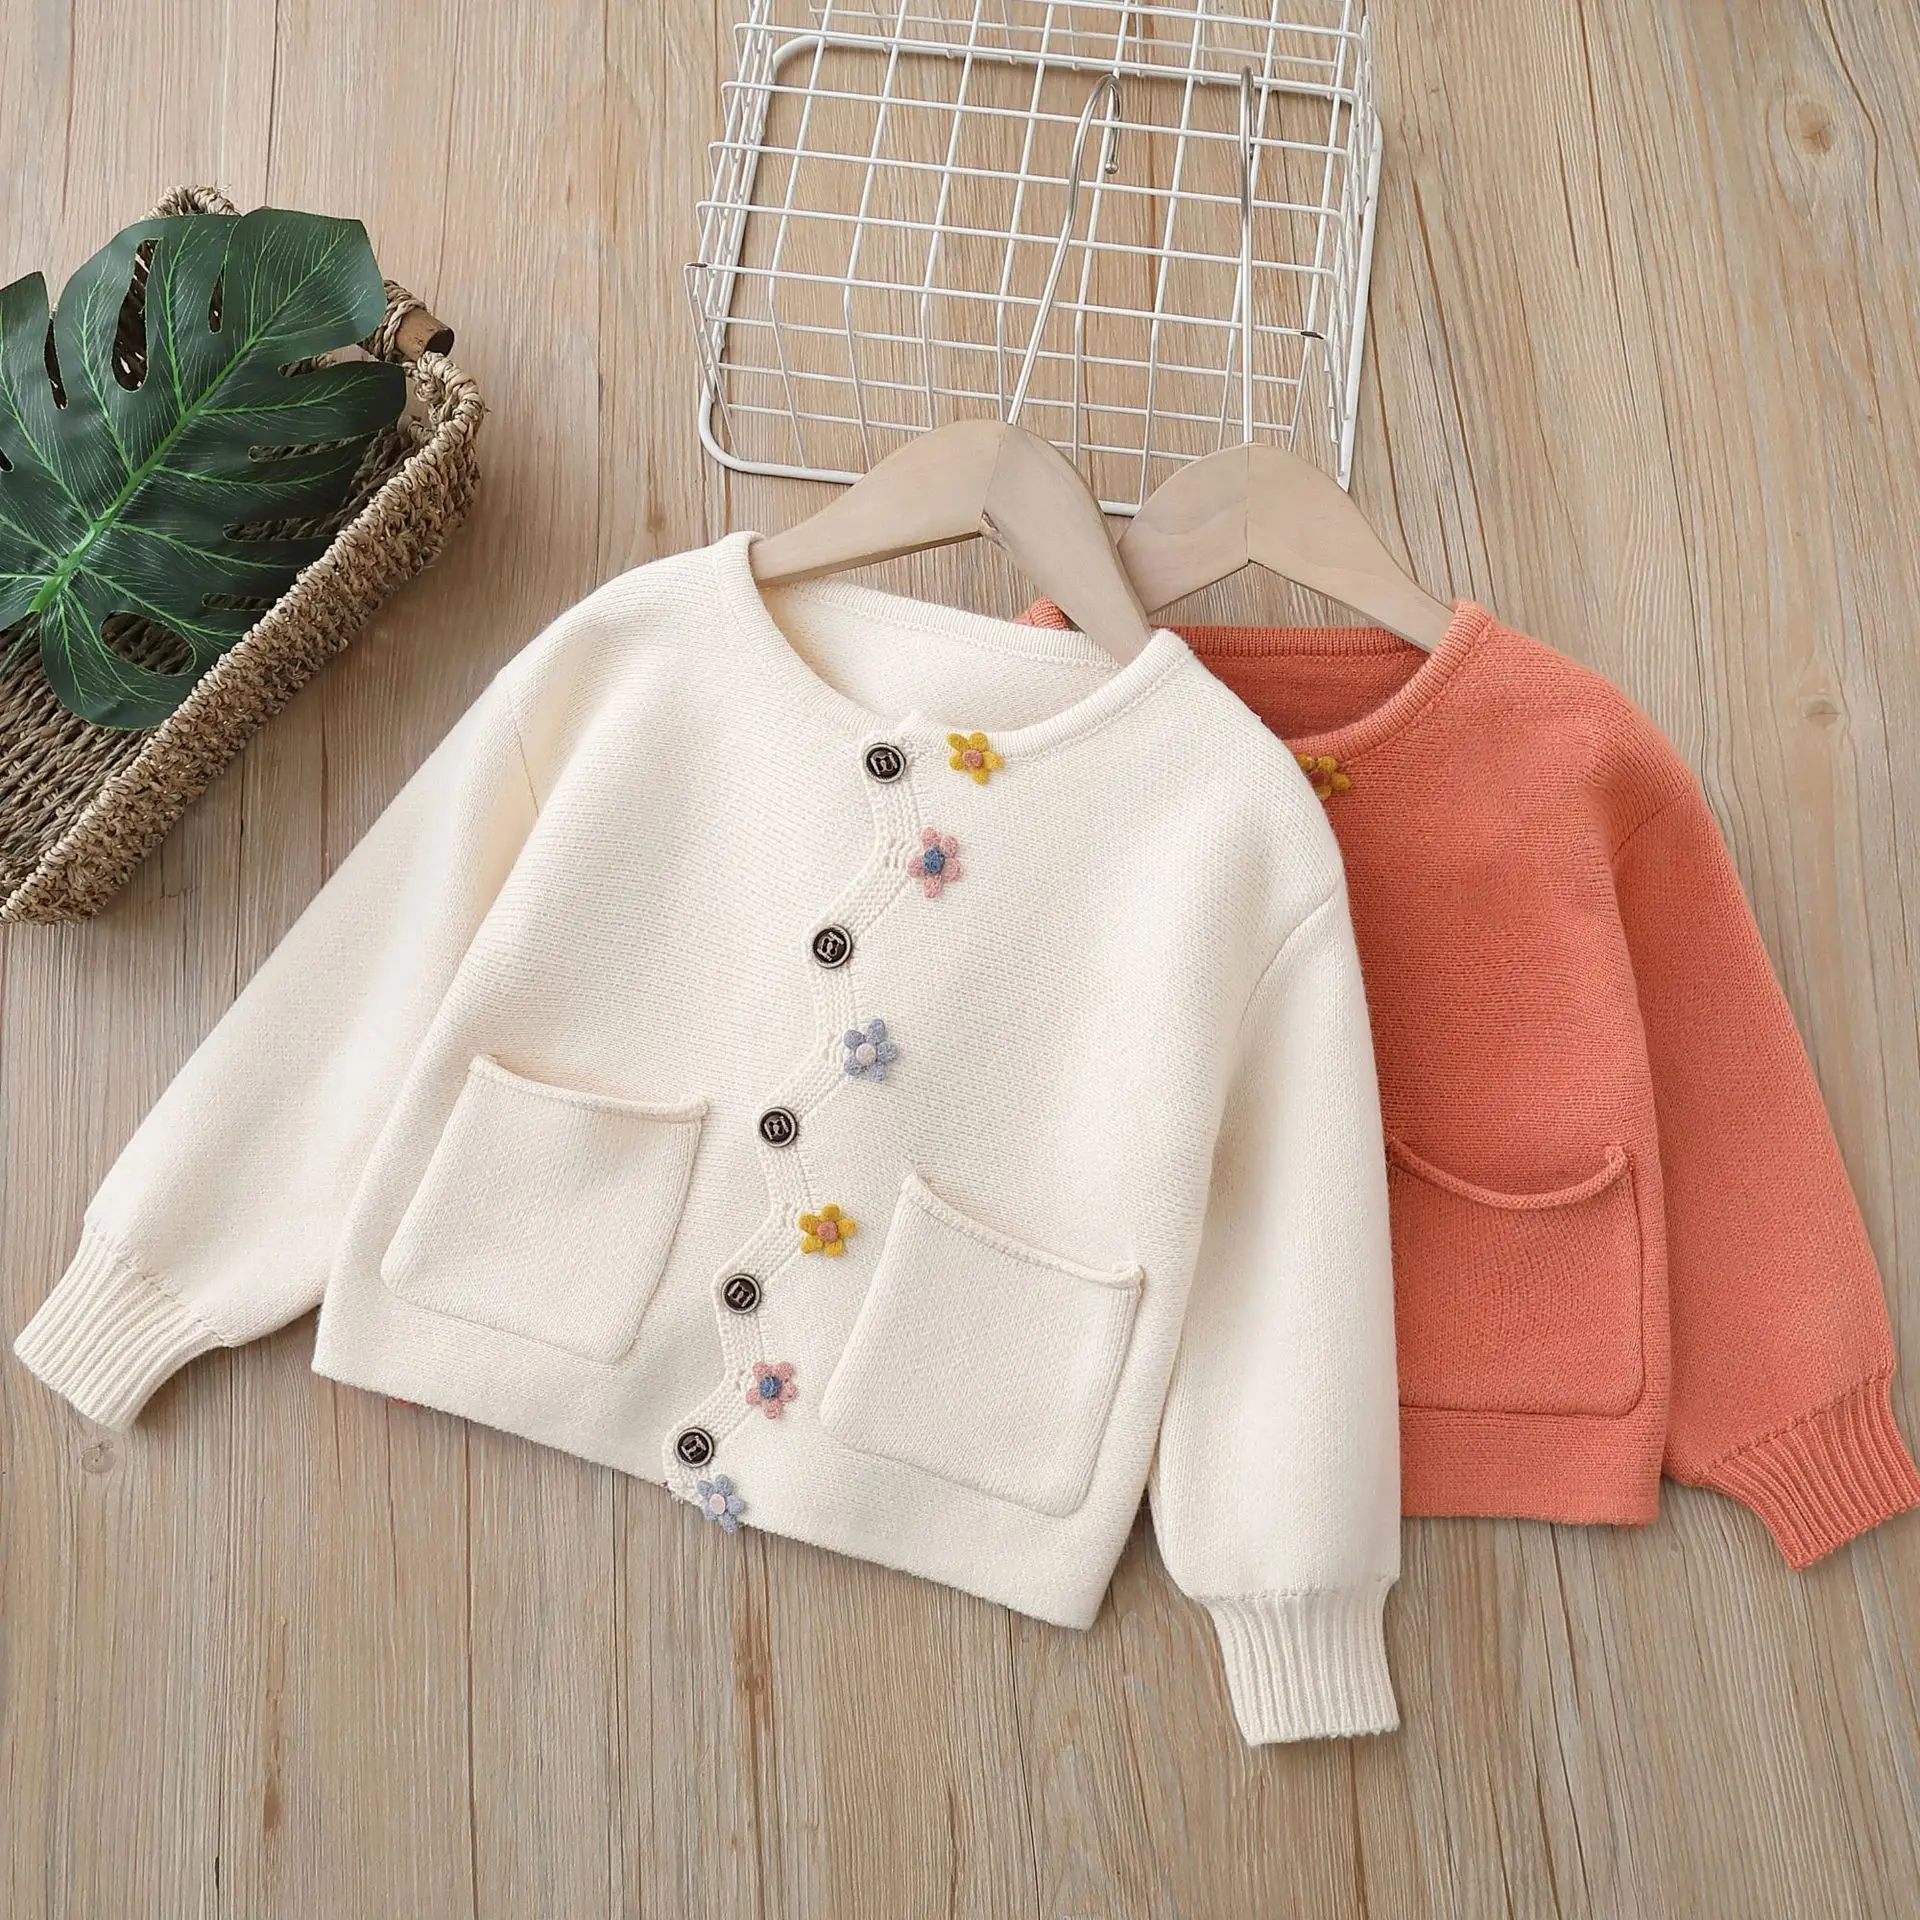 

Fashion Autumn Winter Baby Girls Knitted Sweaters White Orange Flower Decorated Single Breasted Coats Cardigans with Pockets